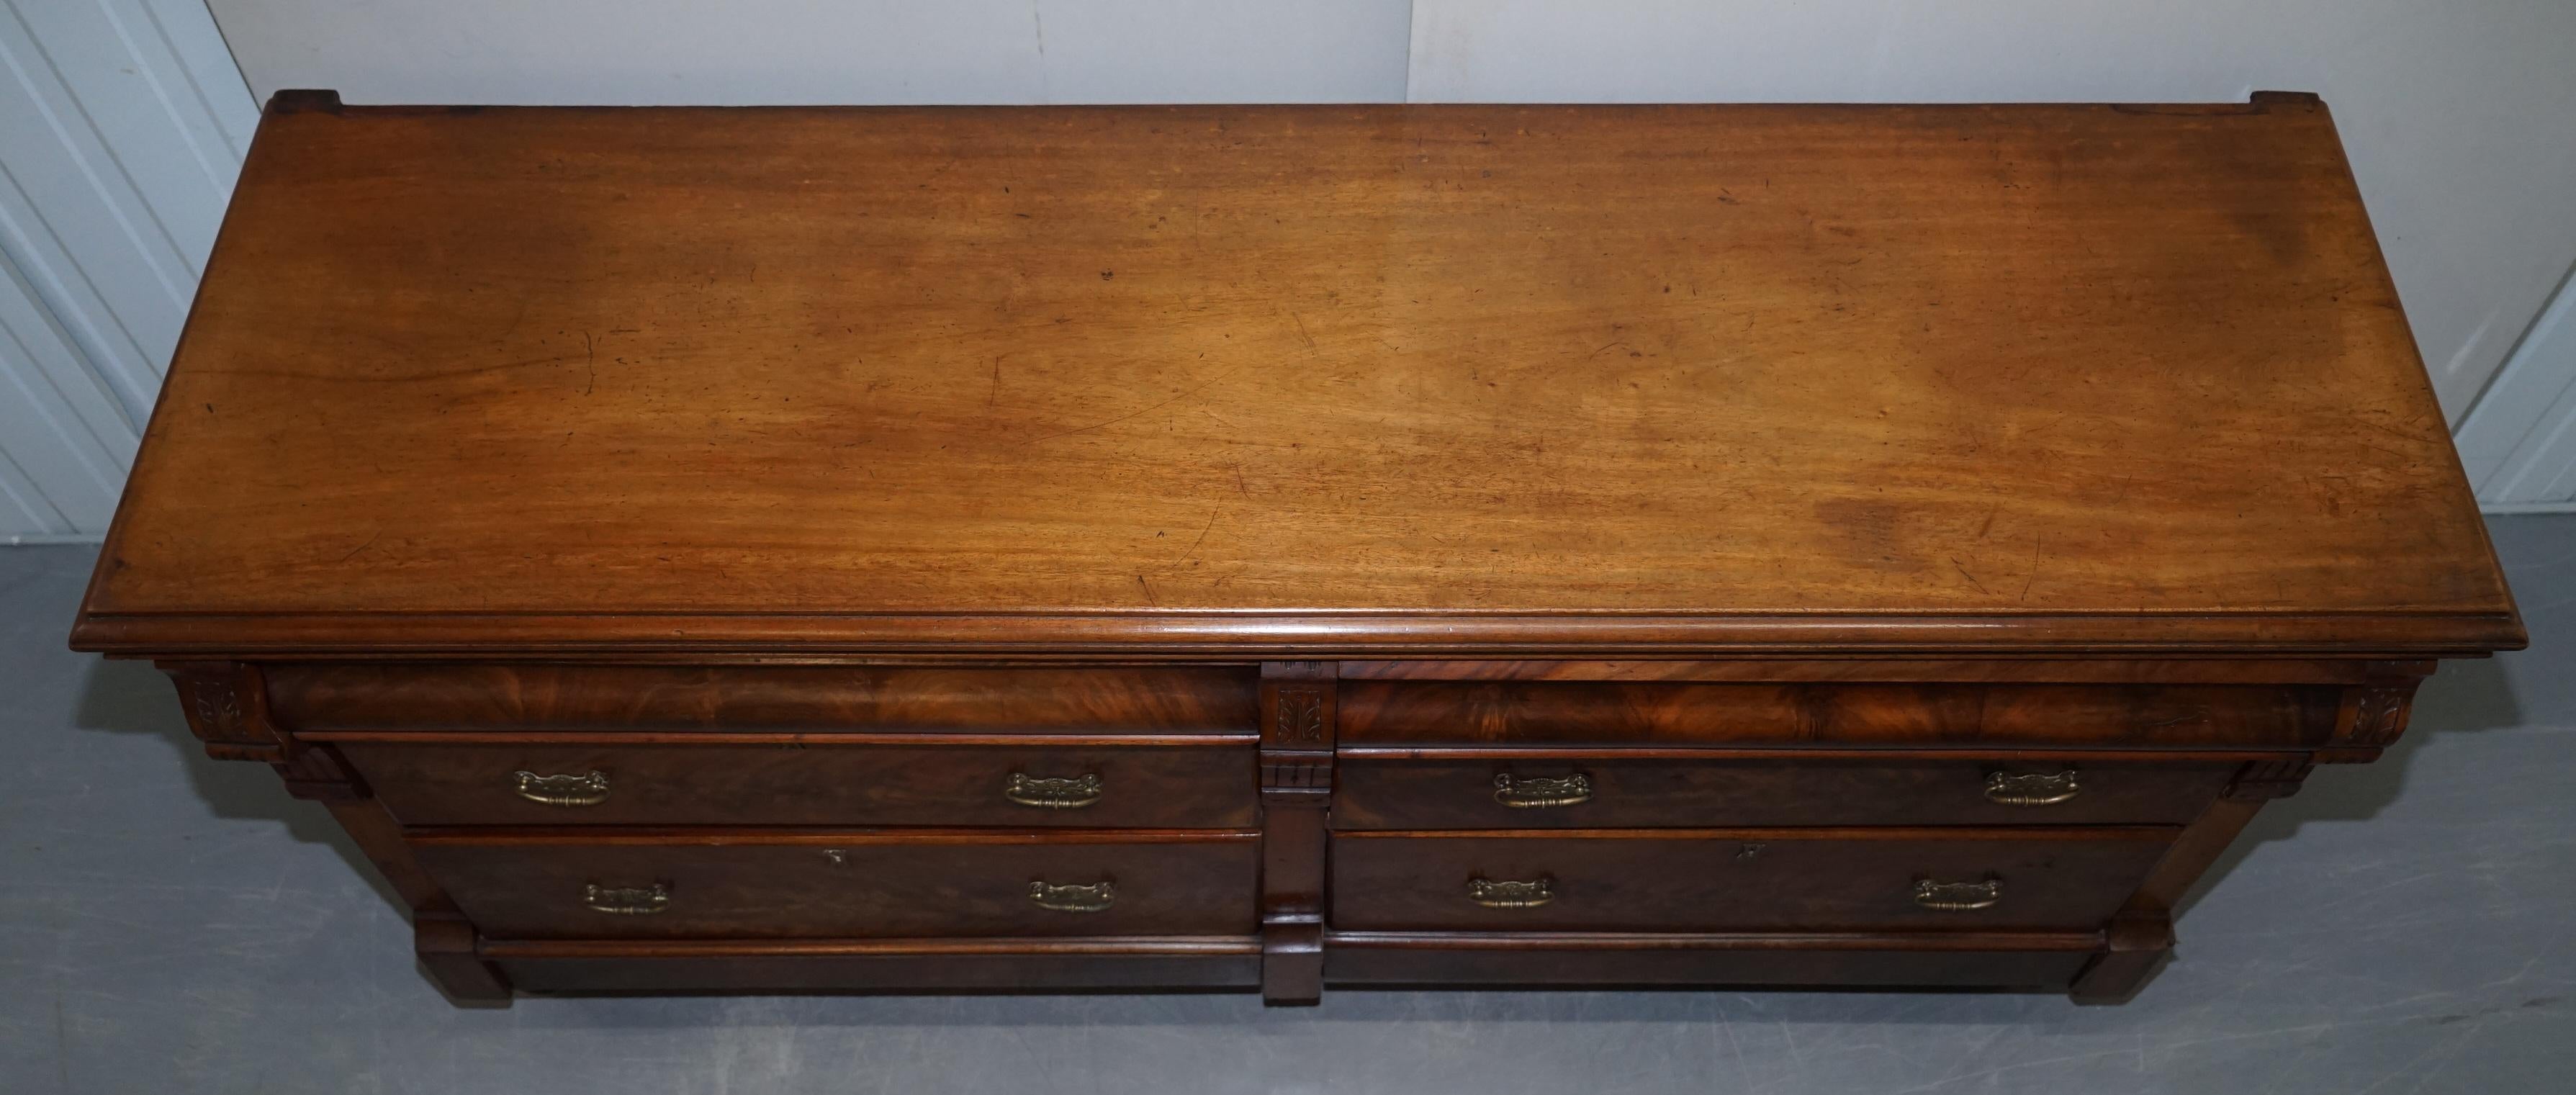 Lovely Victorian Burr & Quarter Cut Walnut Six Drawer Sideboard Chest of Drawers 6